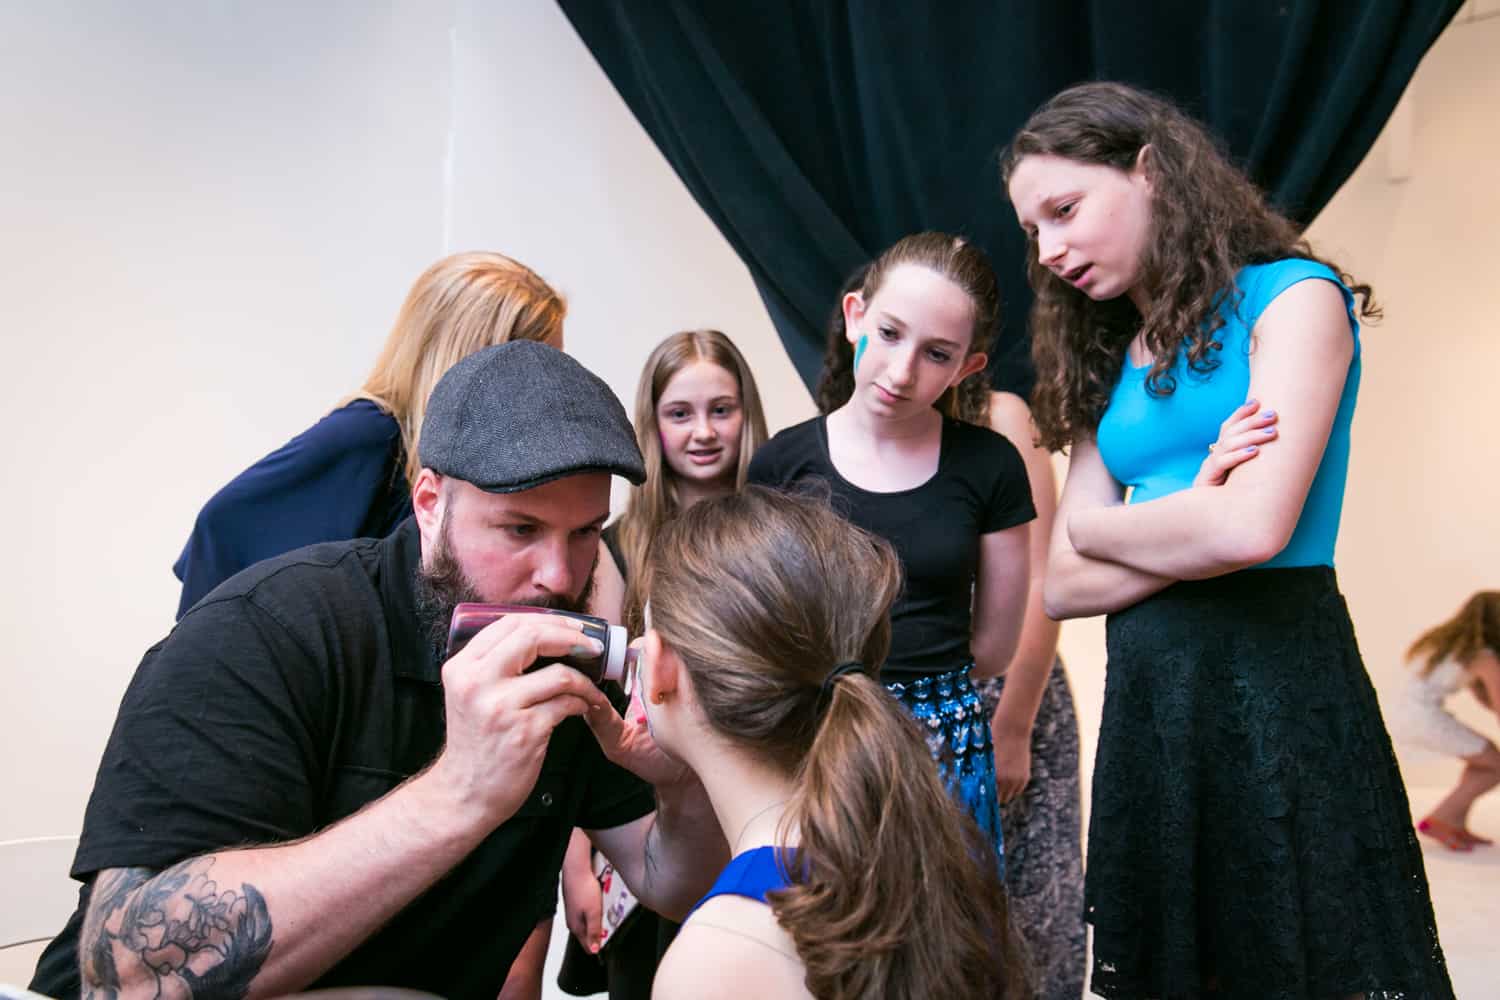 Guests watching as girl gets her face painted for an article on how to plan the perfect bar mitzvah